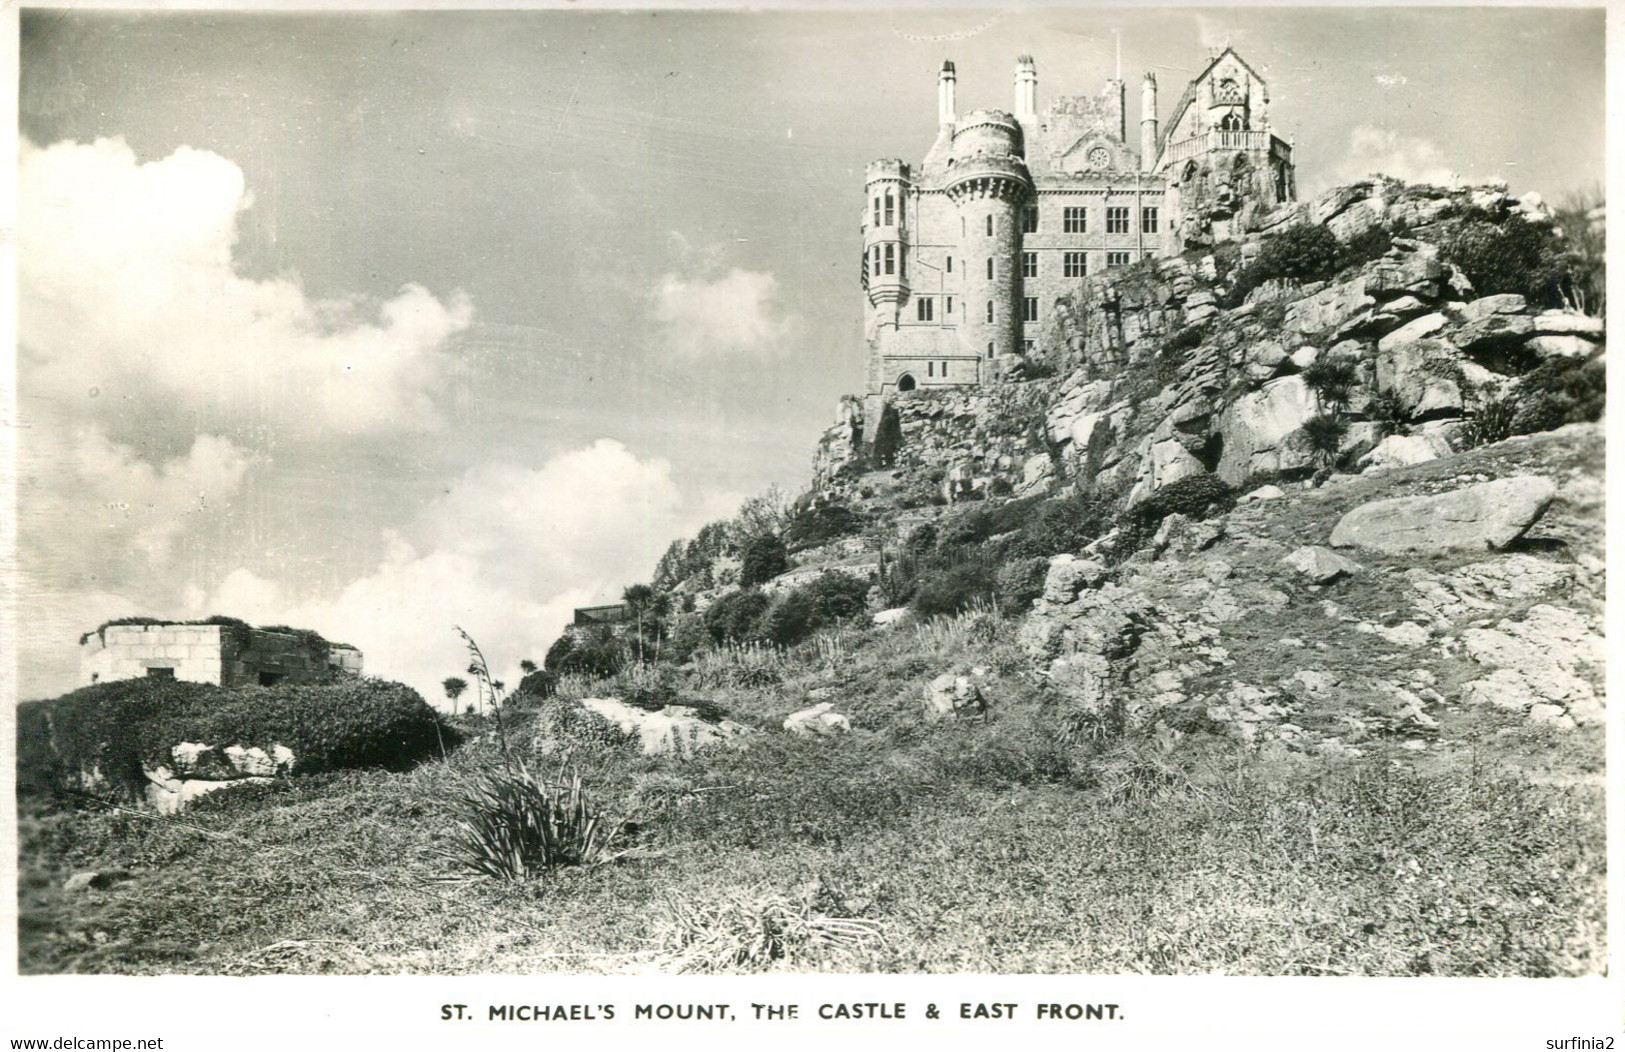 CORNWALL - ST MICHAEL'S MOUNT - THE CASTLE AND EAST FRONT RP Co1130 - St Michael's Mount